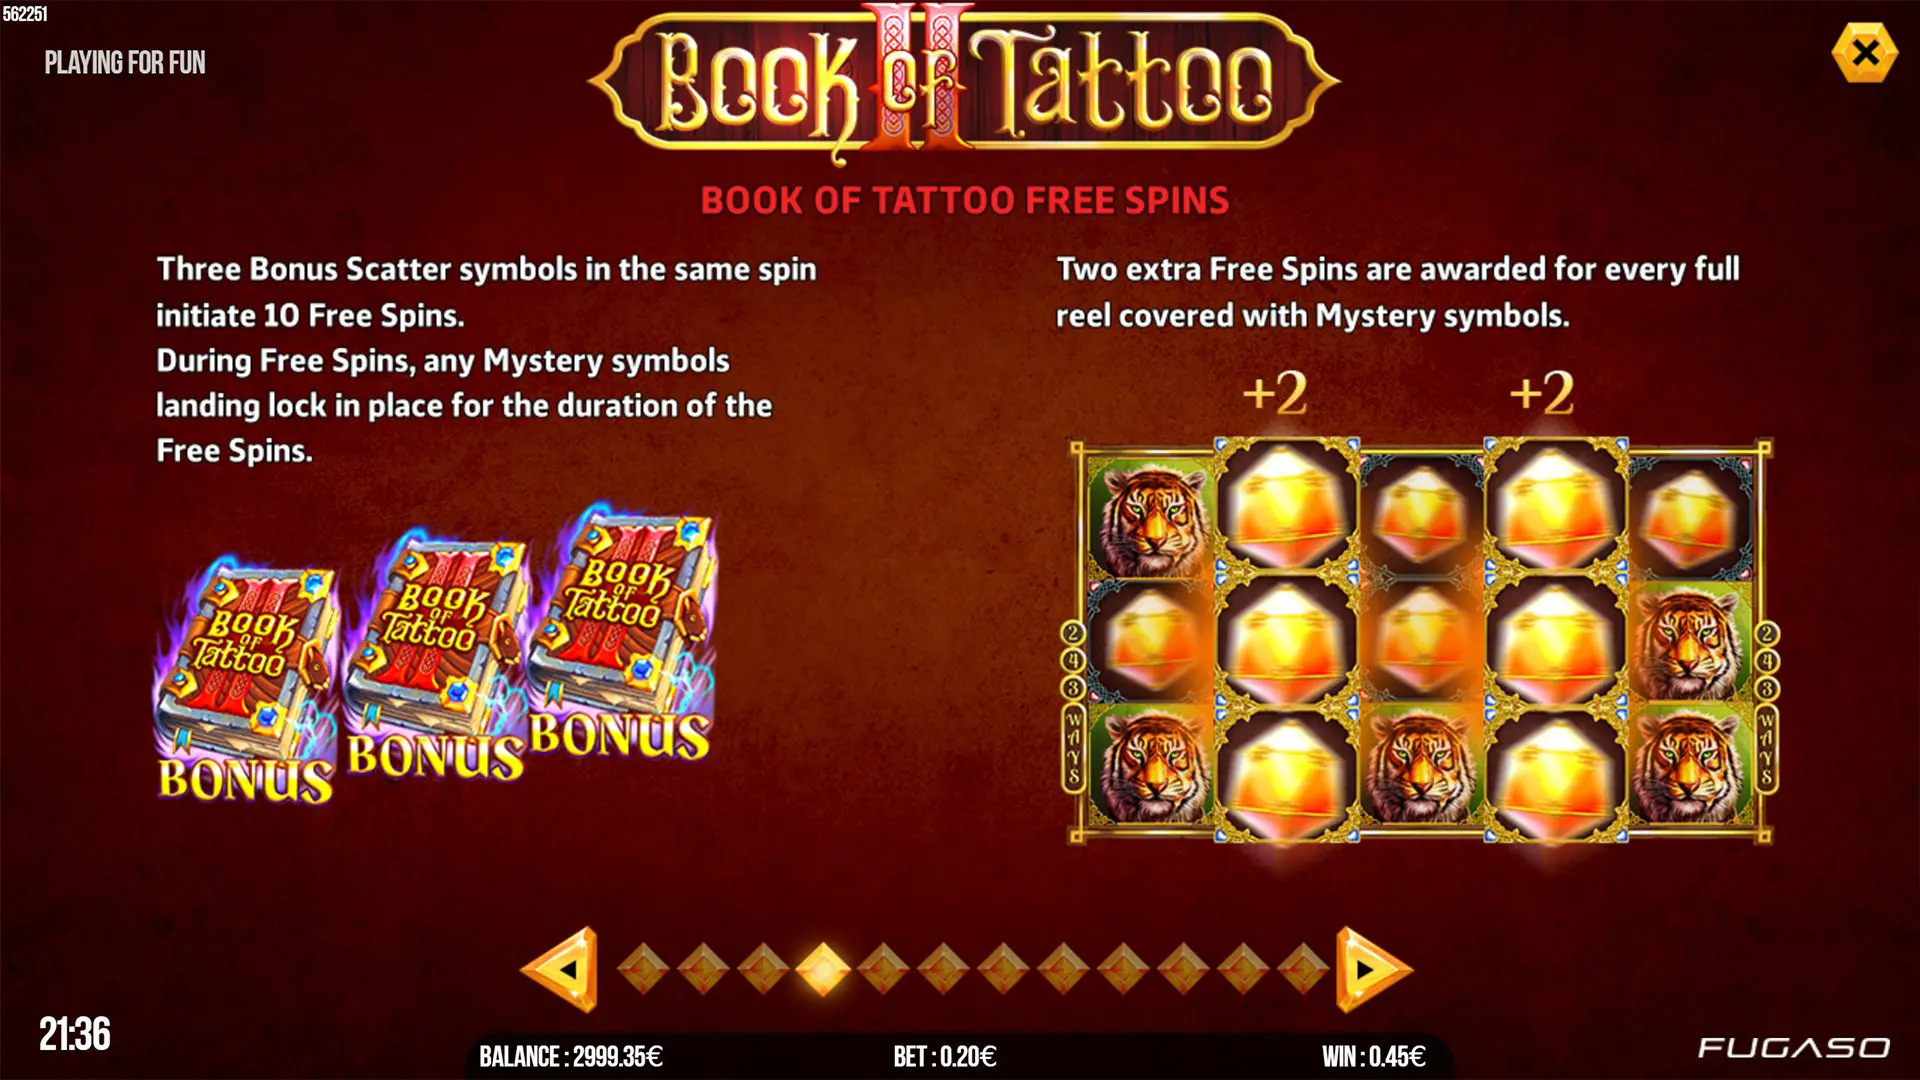 Book of Tattoo 2 Free Spins